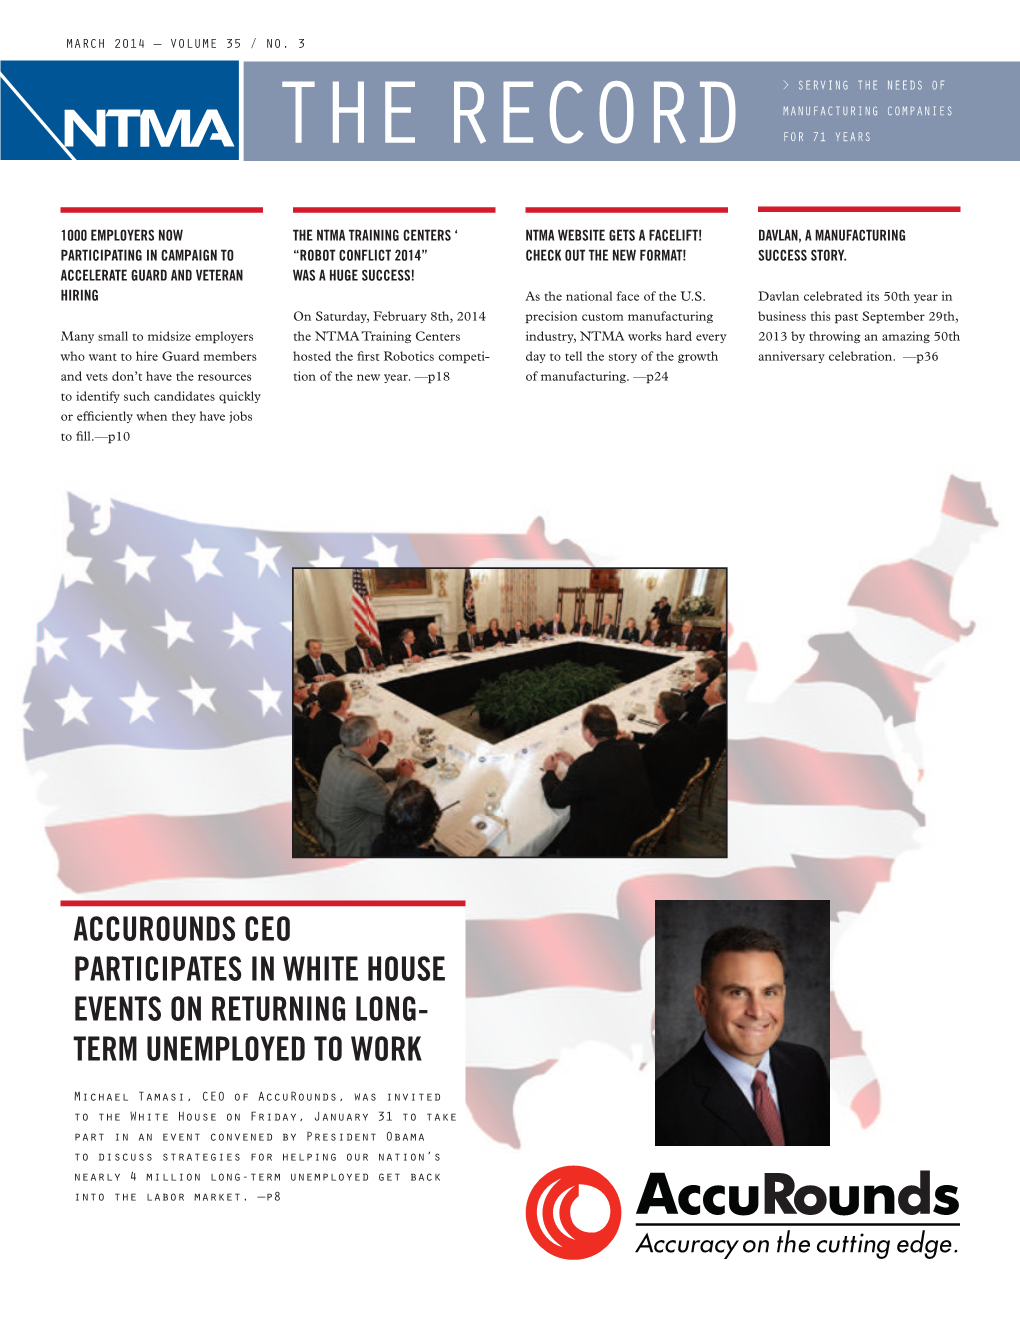 Accurounds CEO Participates in White House Events on Returning Long- Term Unemployed to Work